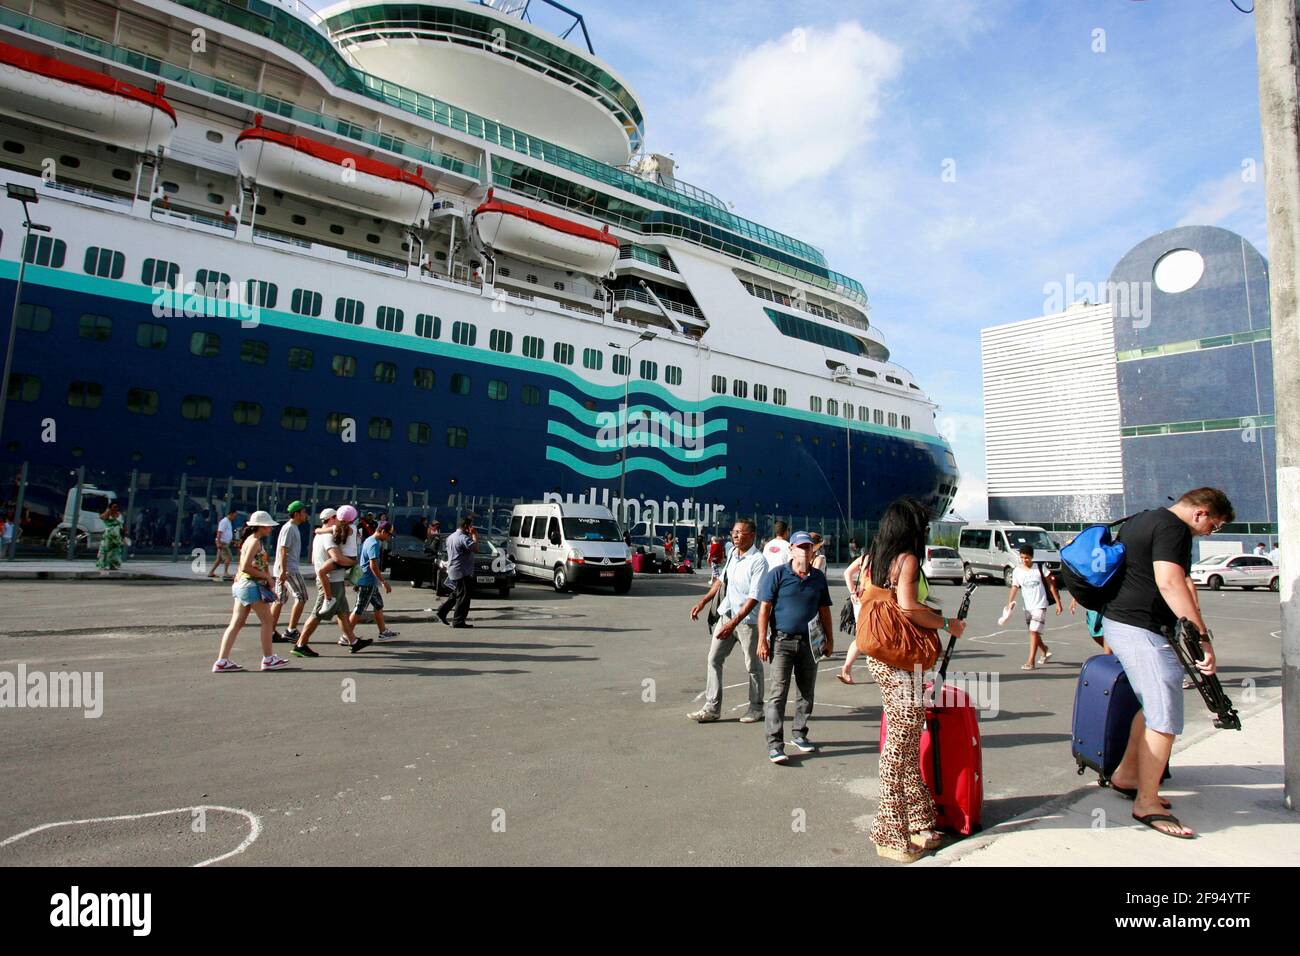 salvador, bahia, brazil - december 28, 2014: passengers are seen disembarking from a cruise ship at the maritime terminal in the port of Salvador. Stock Photo